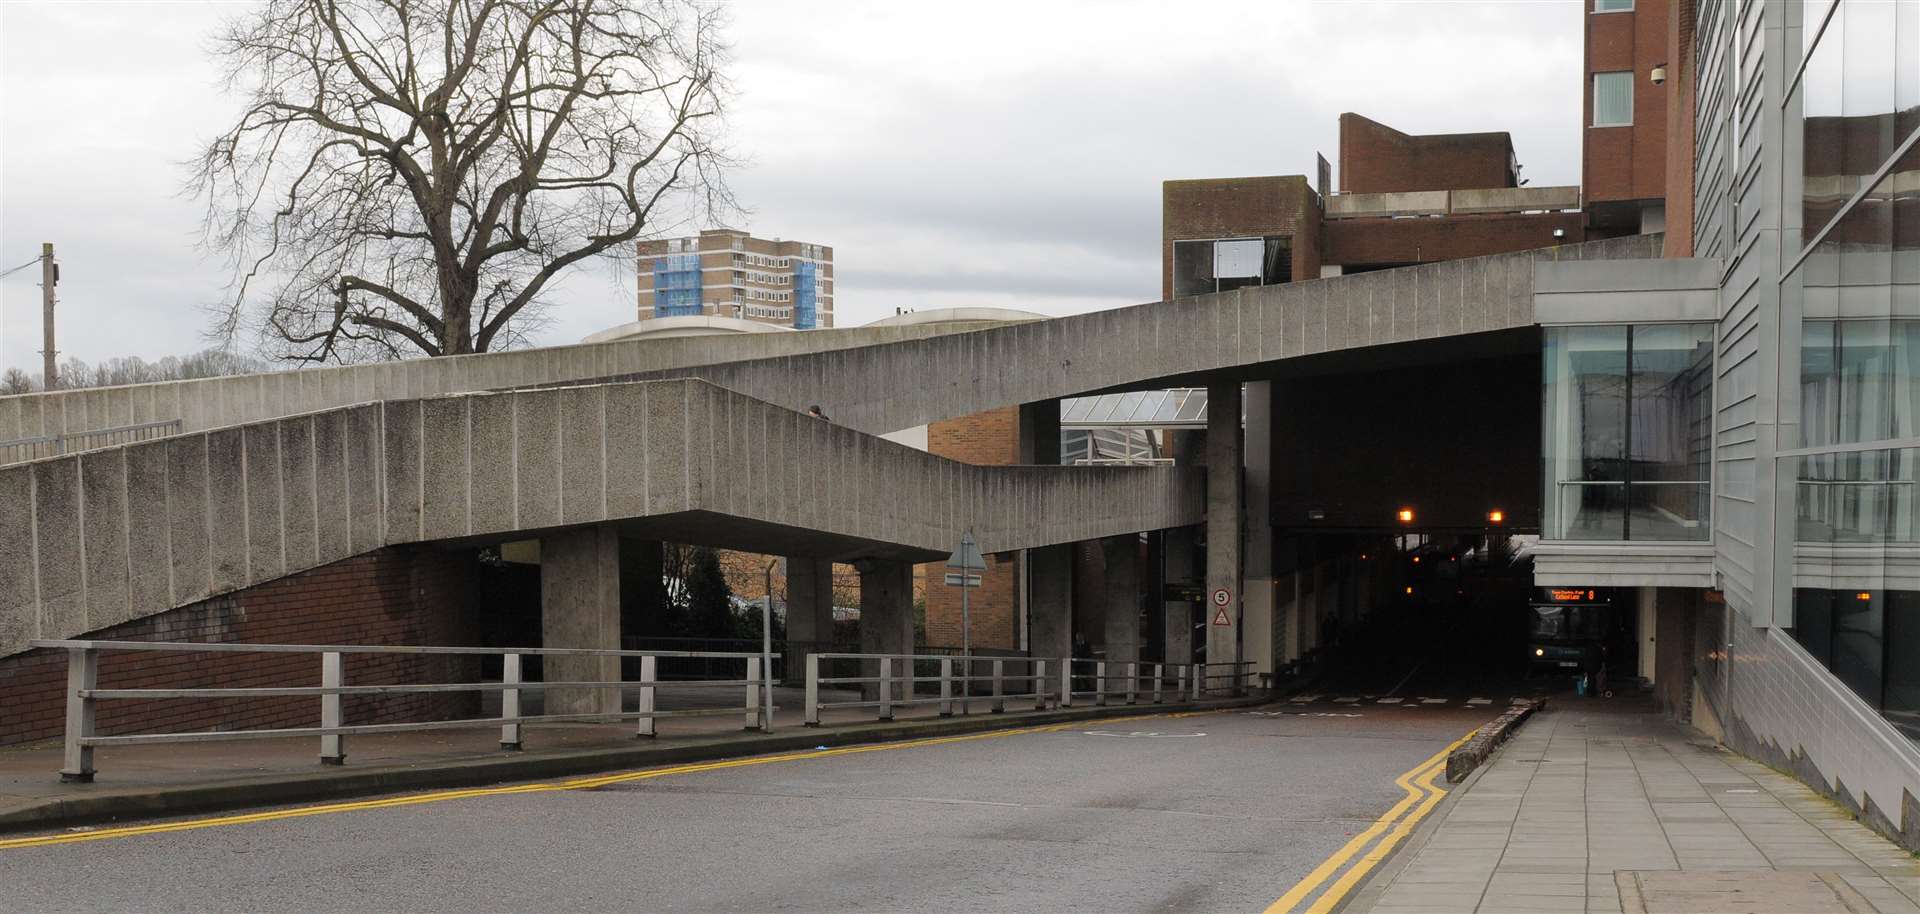 Maidstone bus station as it looks now. Picture: Steve Crispe